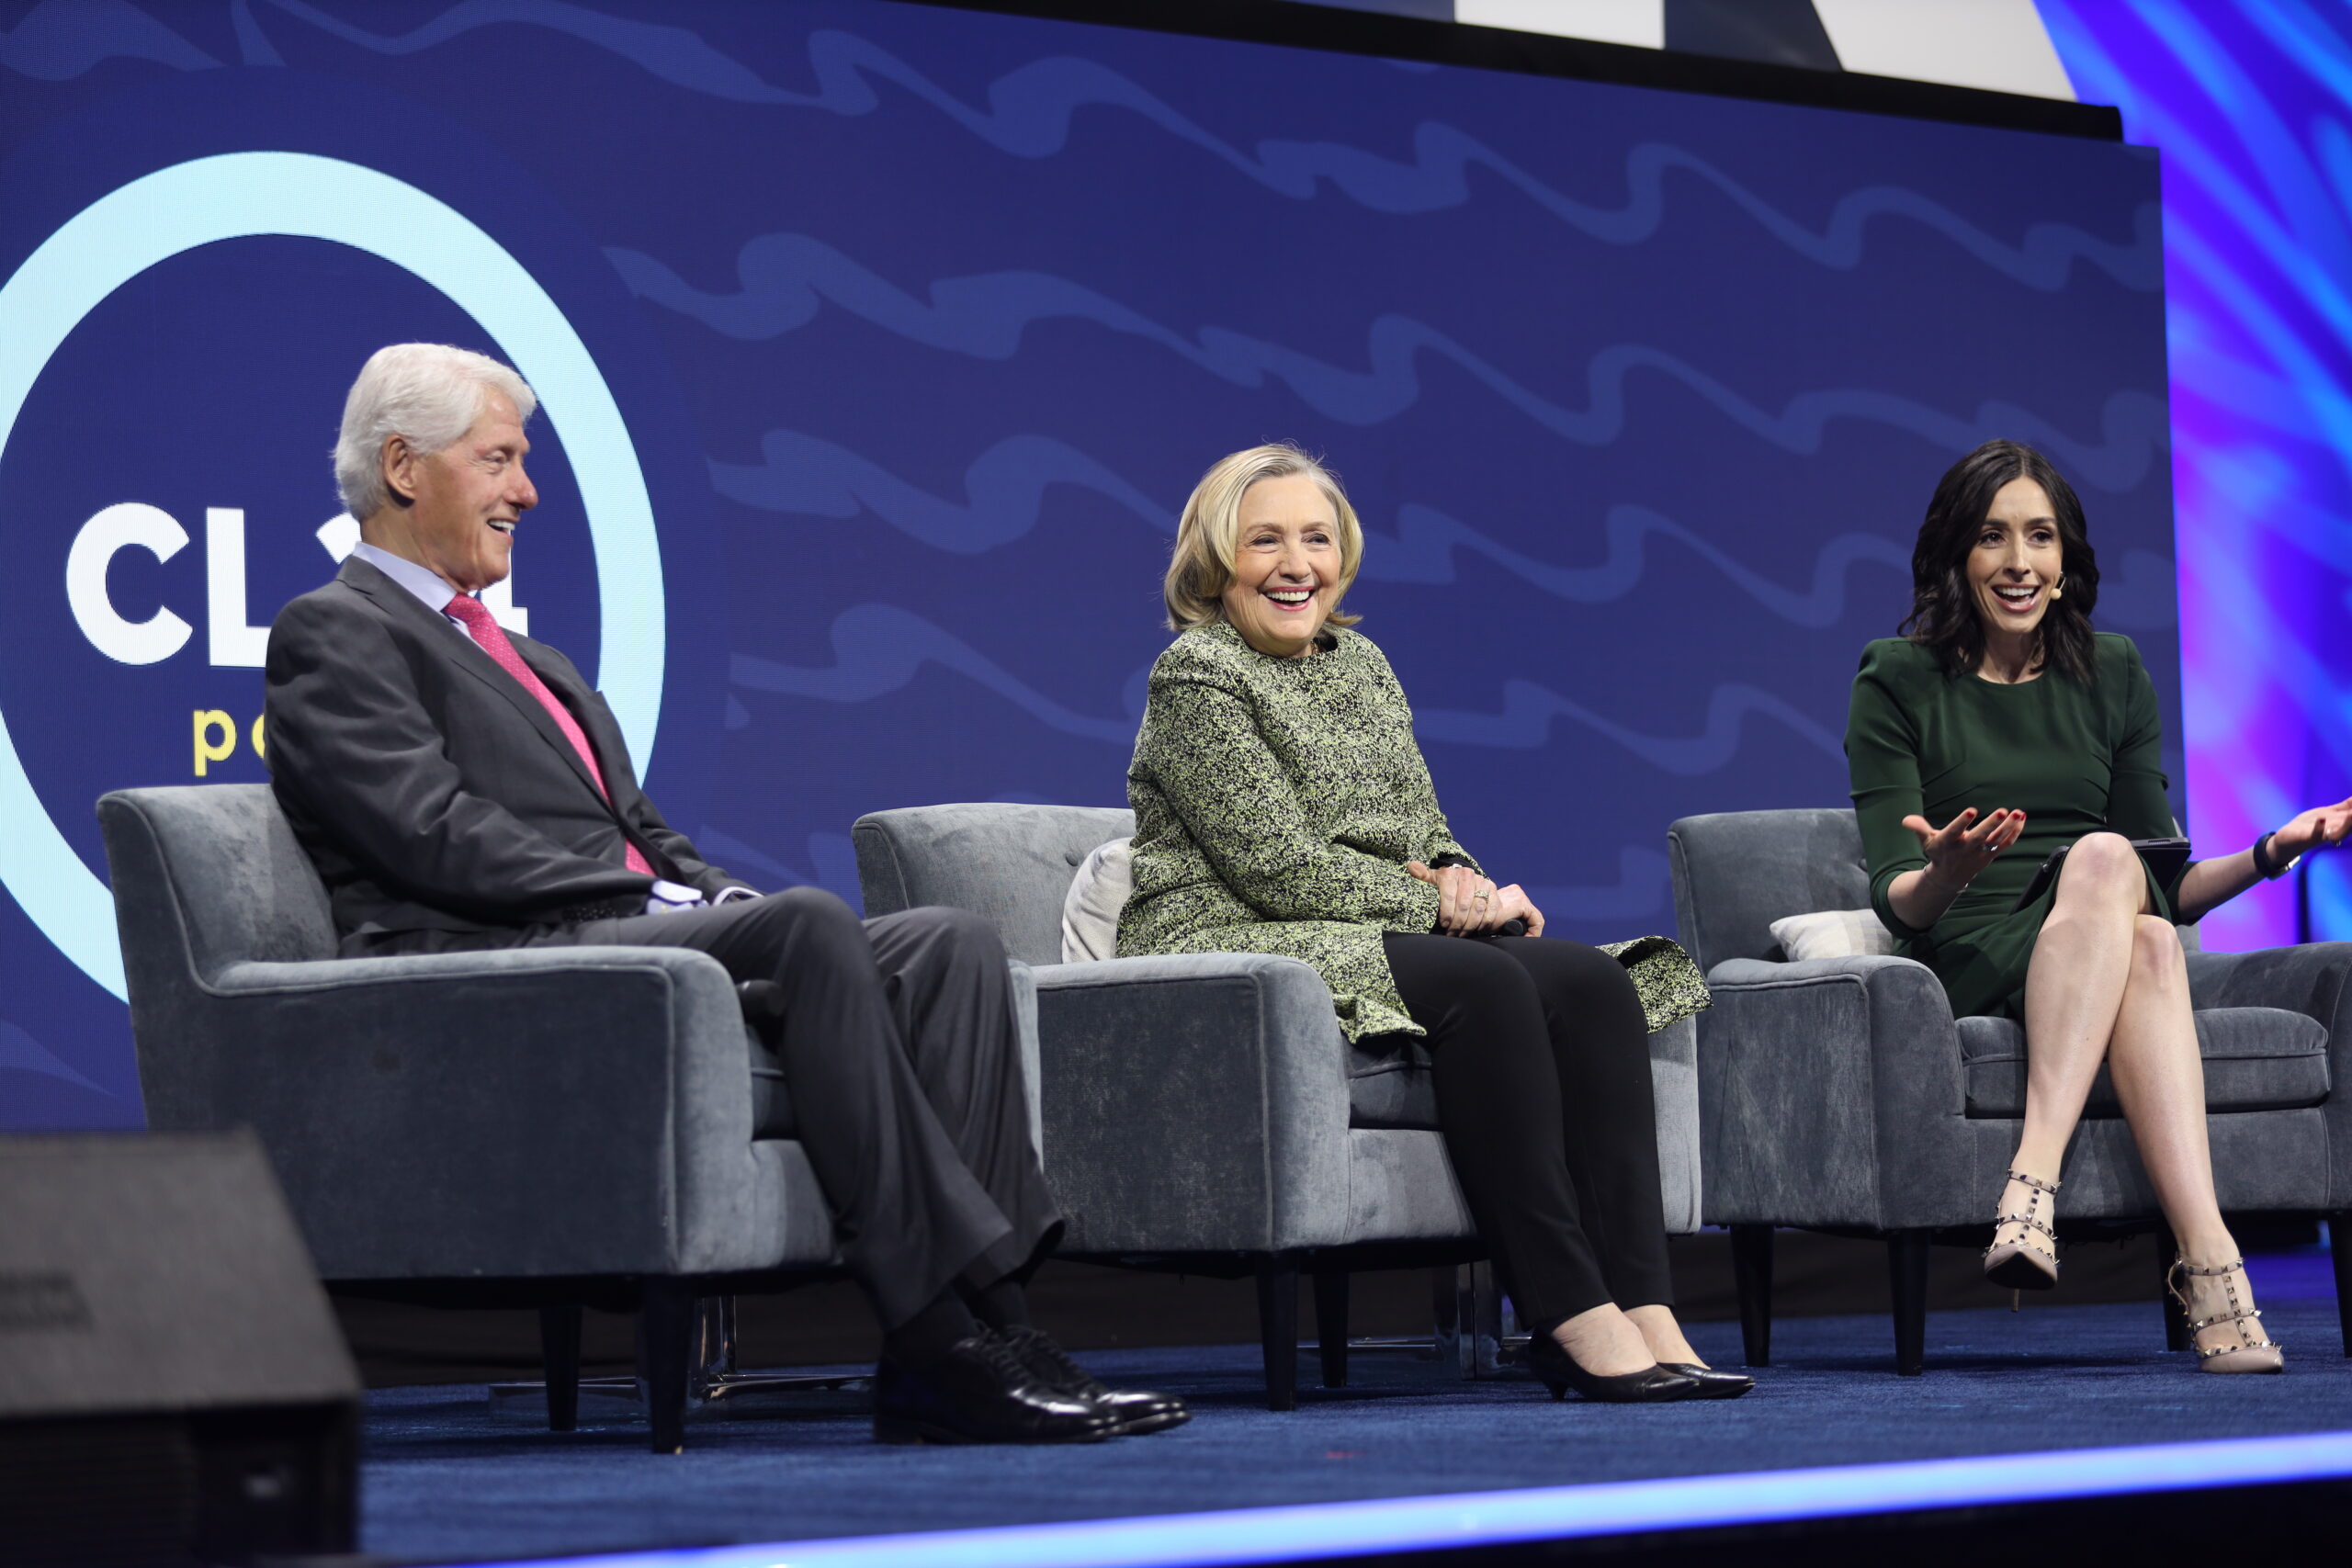 Holly Ransom on stage interviewing President Bill Clinton & Secretary Hillary Clinton